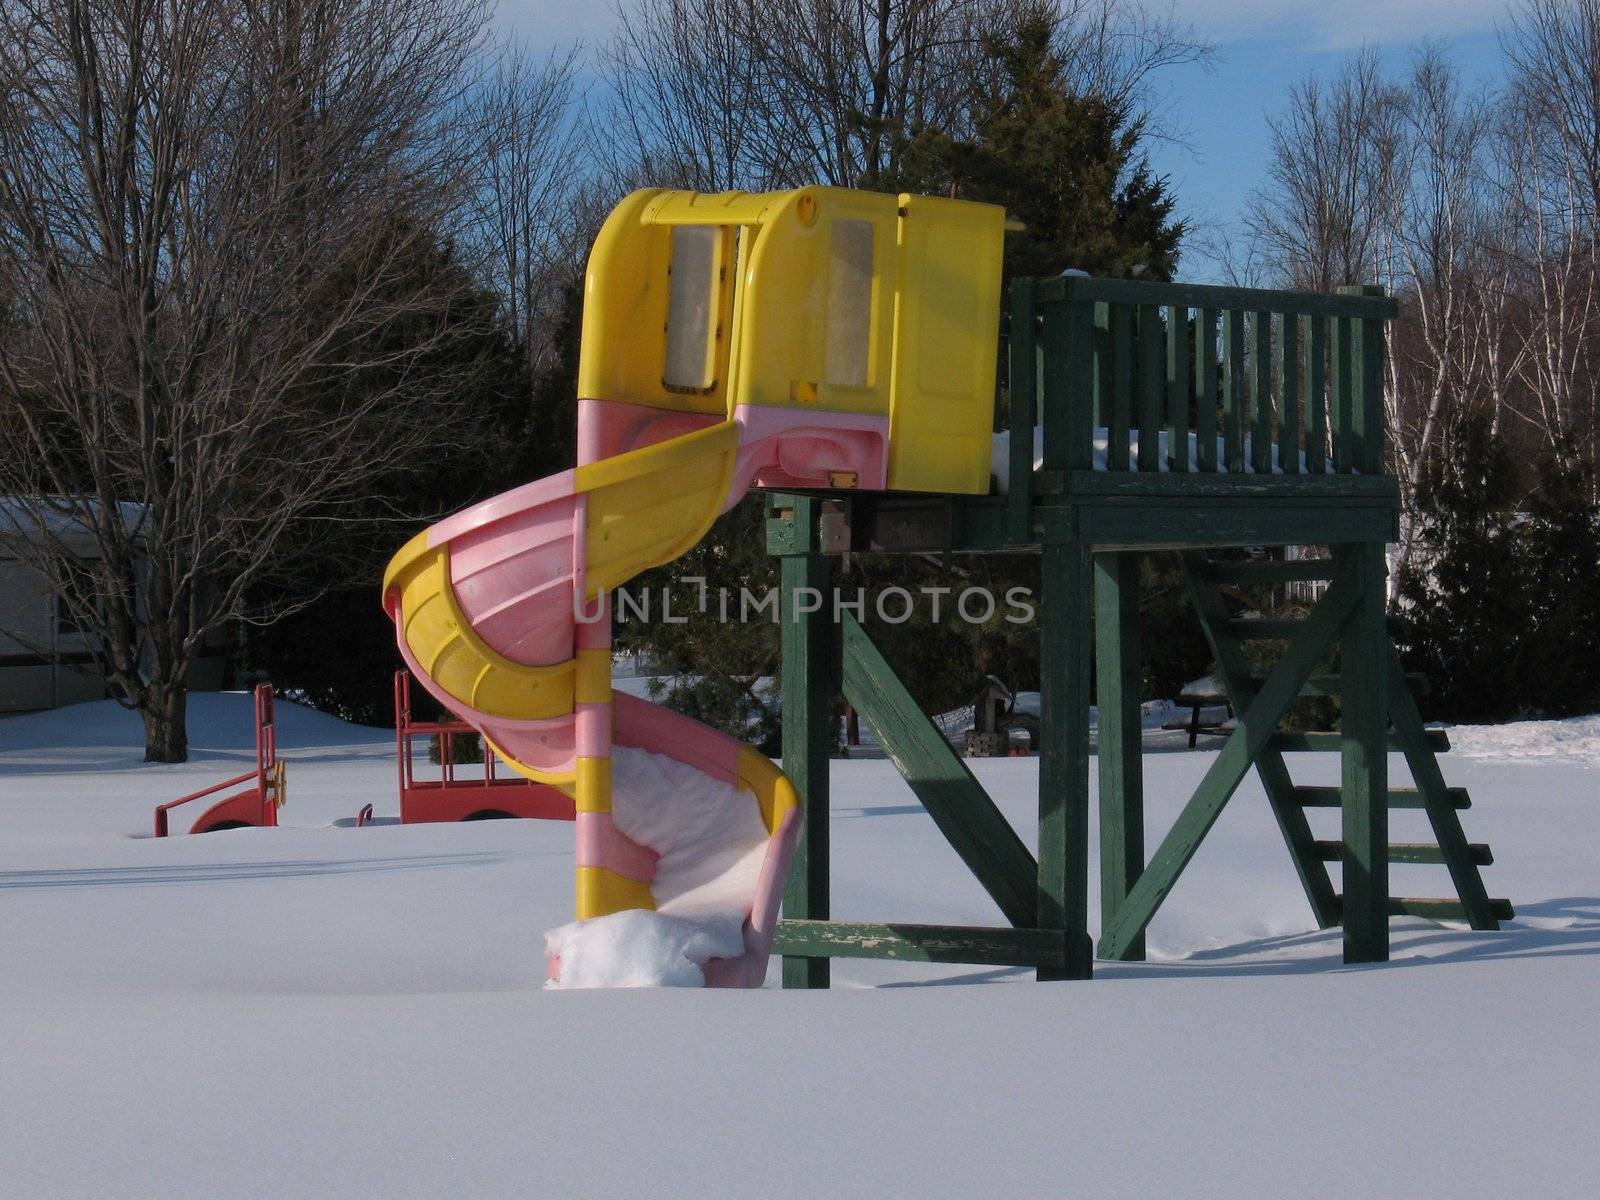 A slide in a playground at the height of winter.